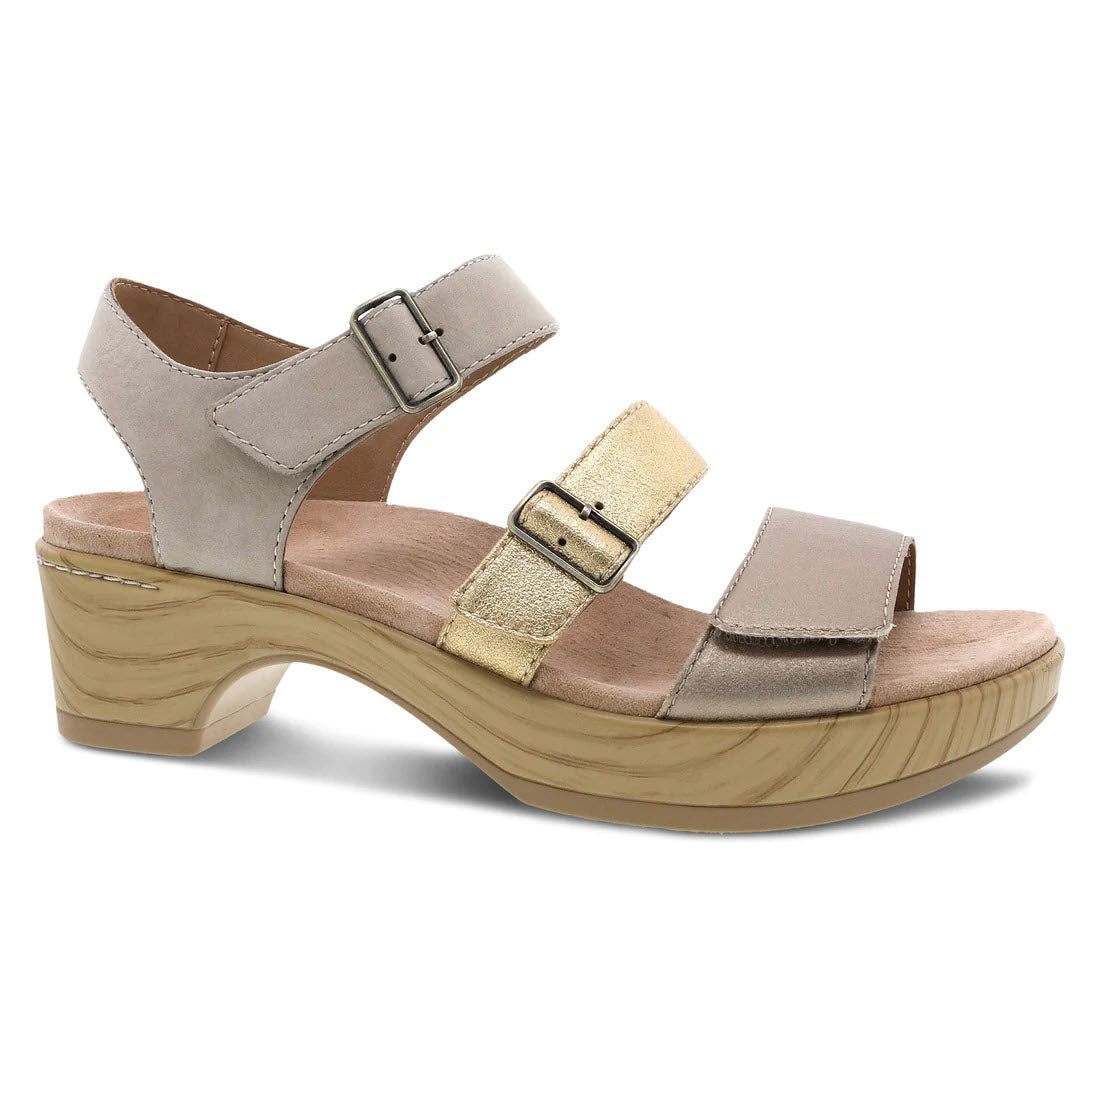 A beige, triple strap Dansko Malena Metallic Multi sandal with buckle closures and a chunky wooden heel on a white background.